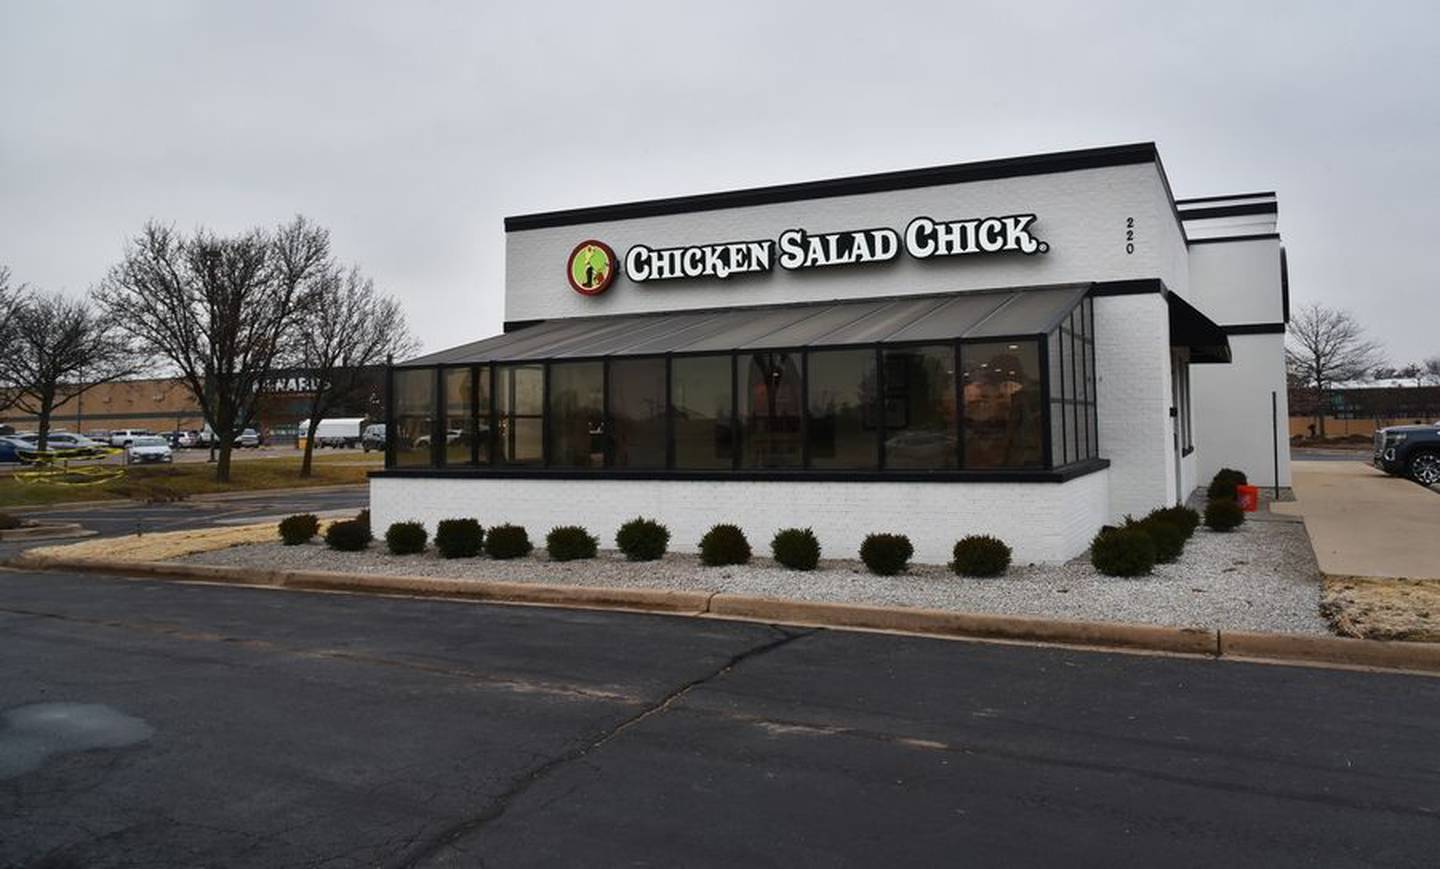 Chicken Salad Chick, a national restaurant chain with restaurants in 17 states, offers 12 varieties of chicken salad along with other menu items.